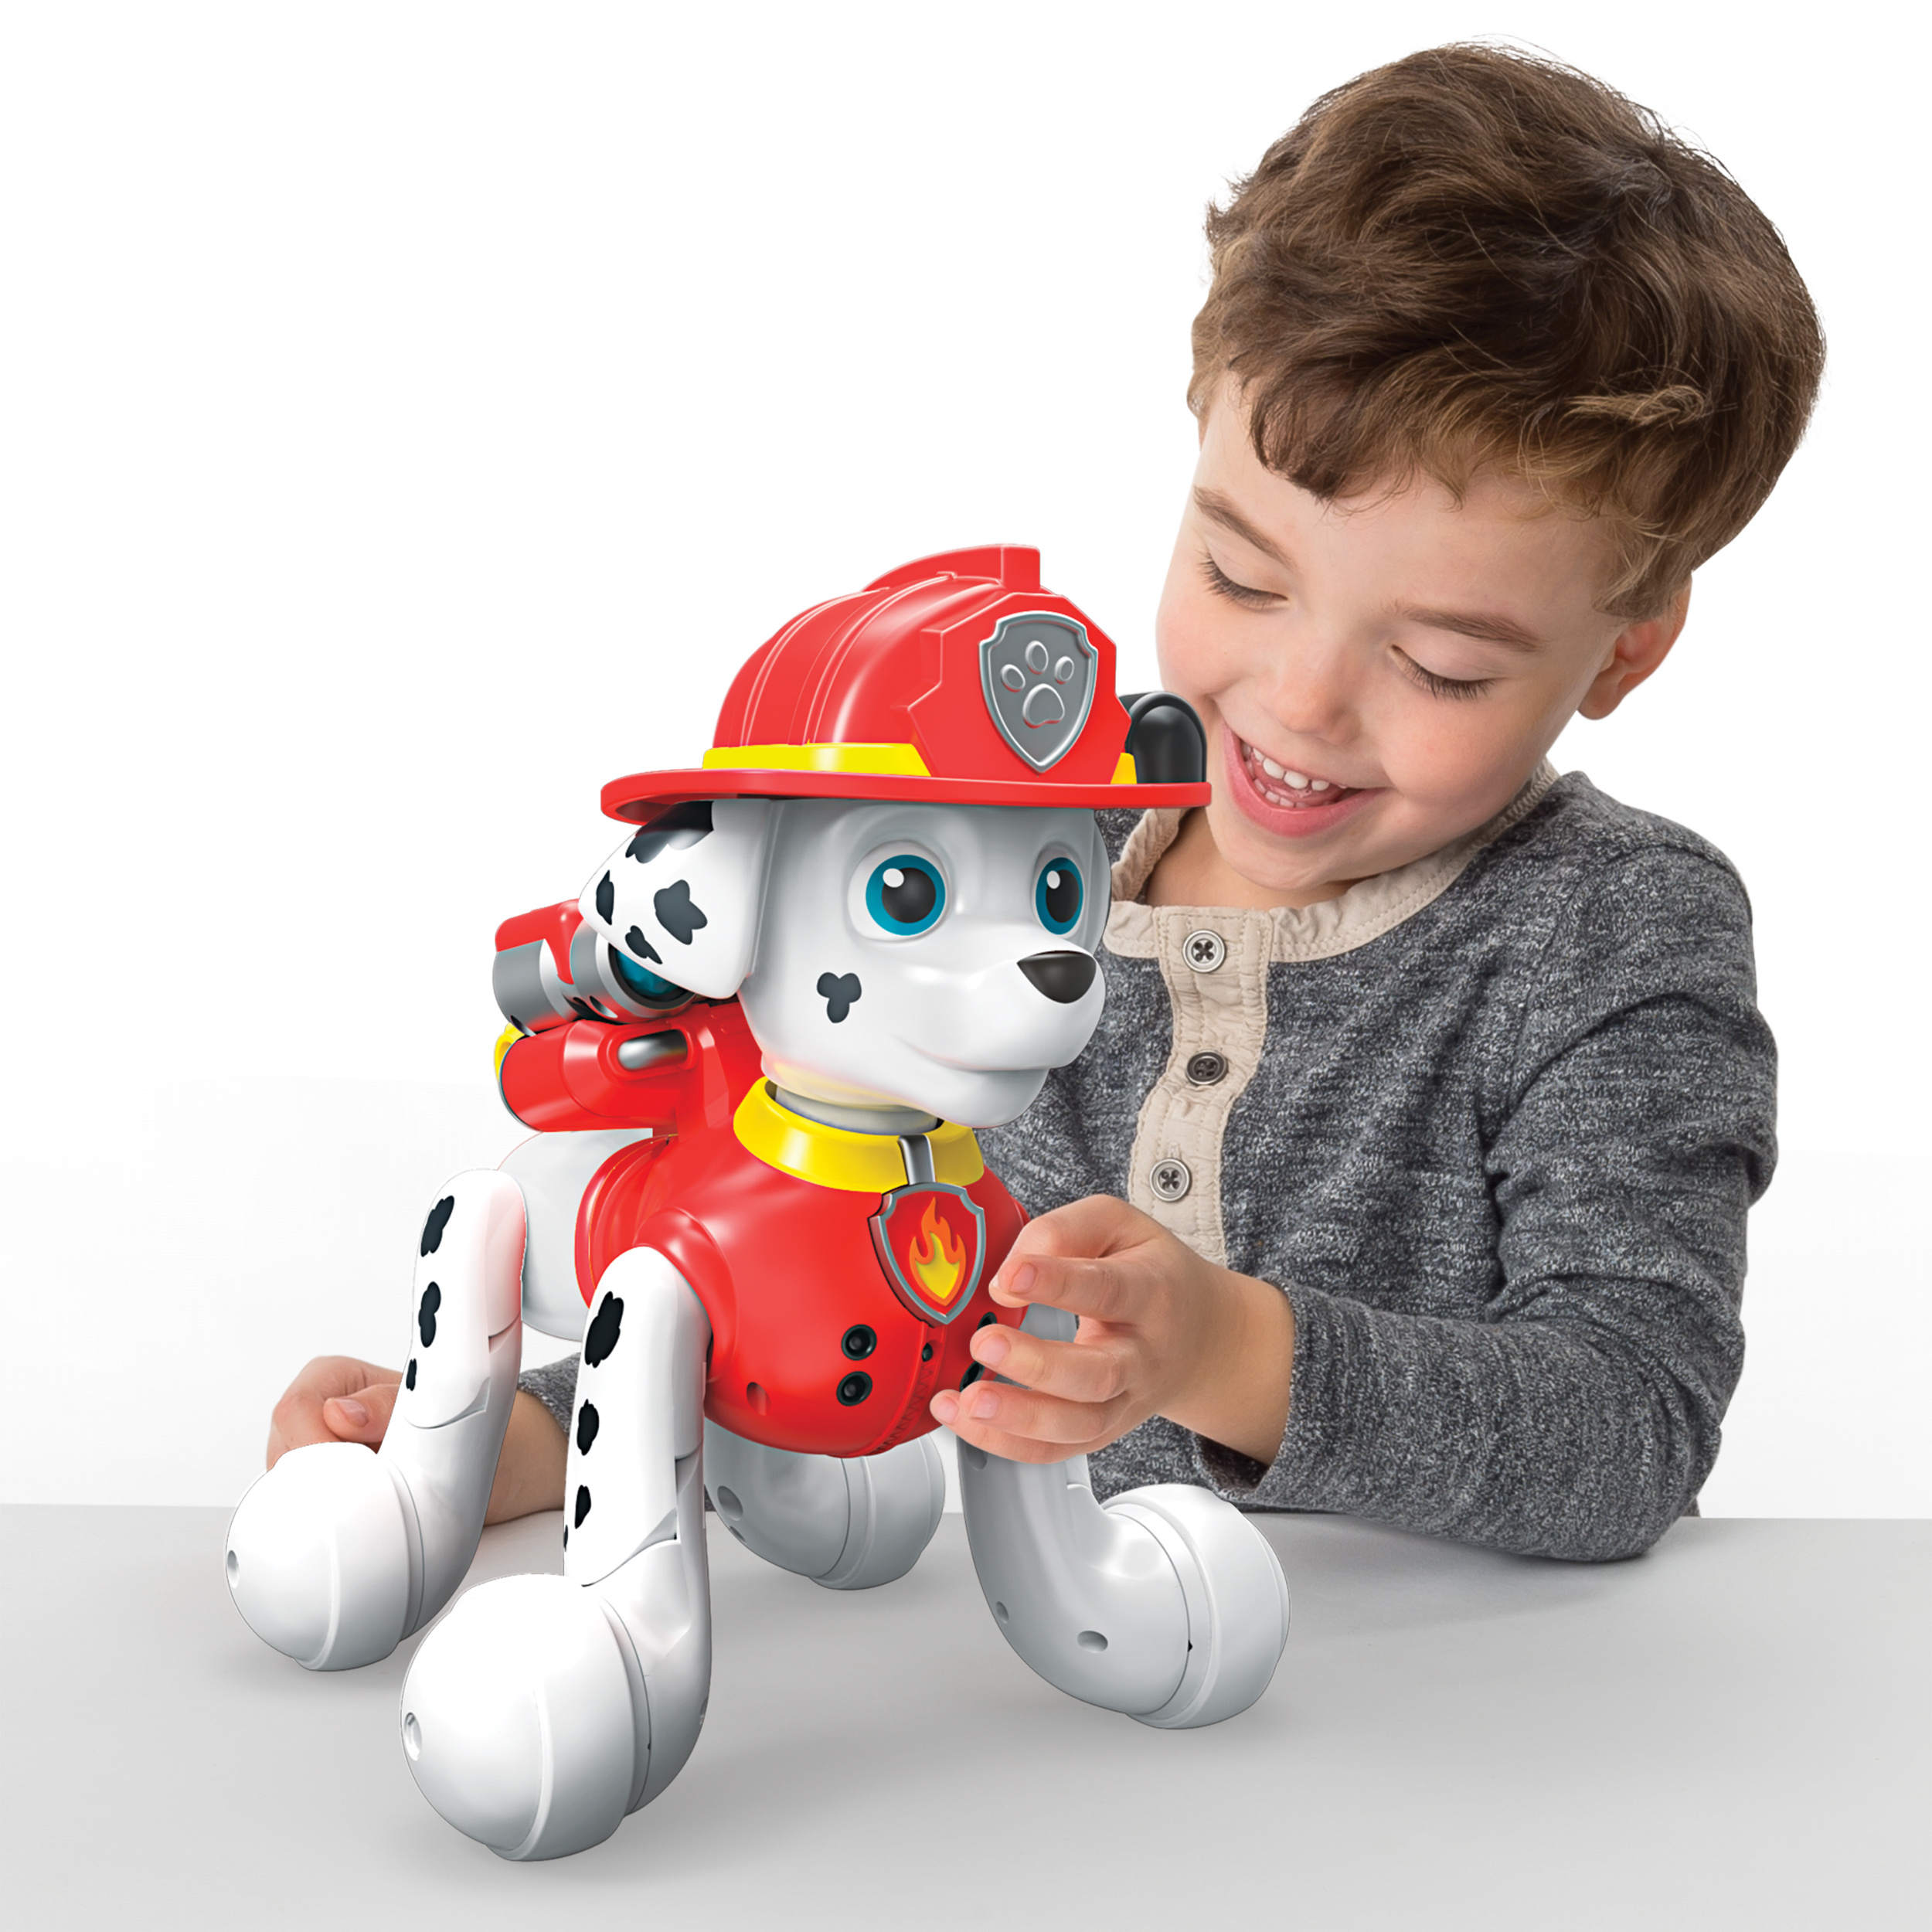 Paw Patrol, Zoomer Marshall, Interactive Pup with Missions, Sounds and Phrases, by Spin Master - image 3 of 8